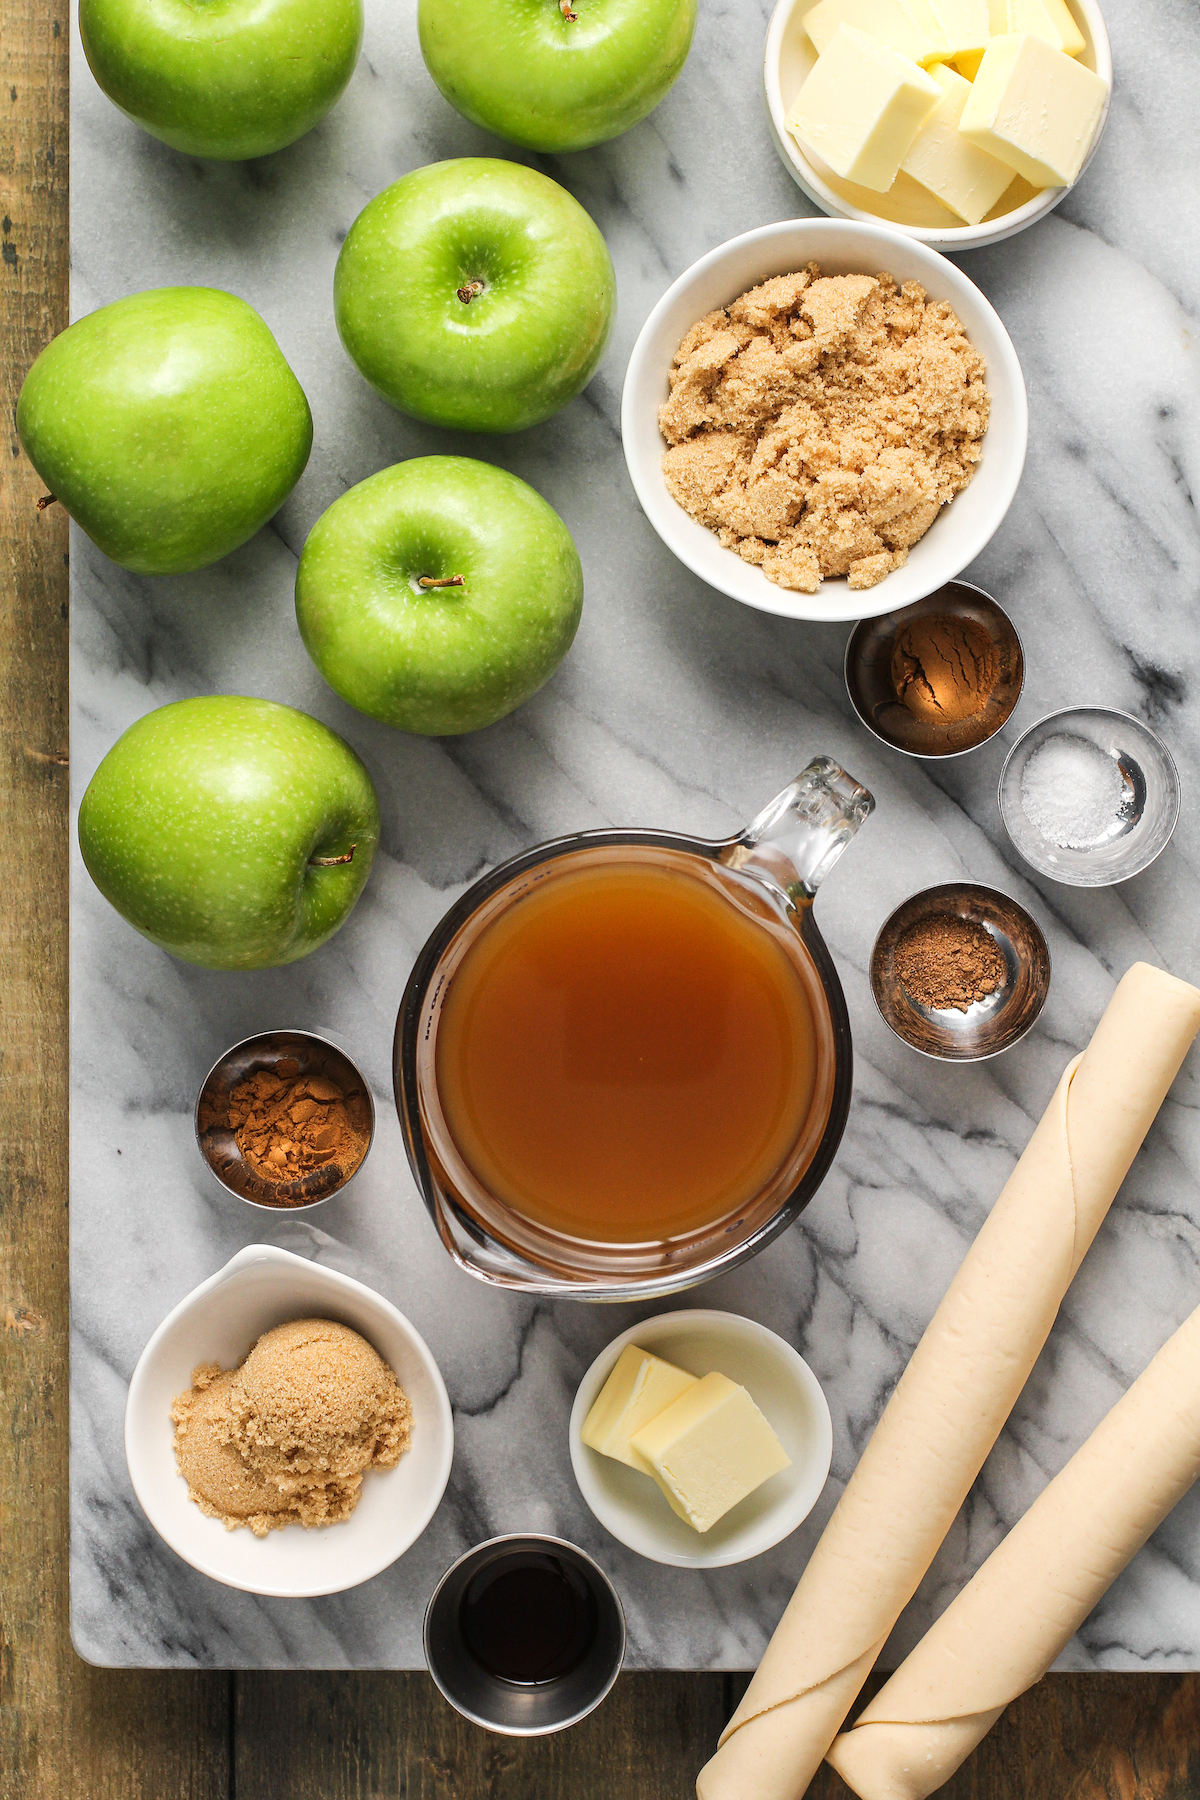 Apple dumpling ingredients measured and arranged on a marble cutting board.